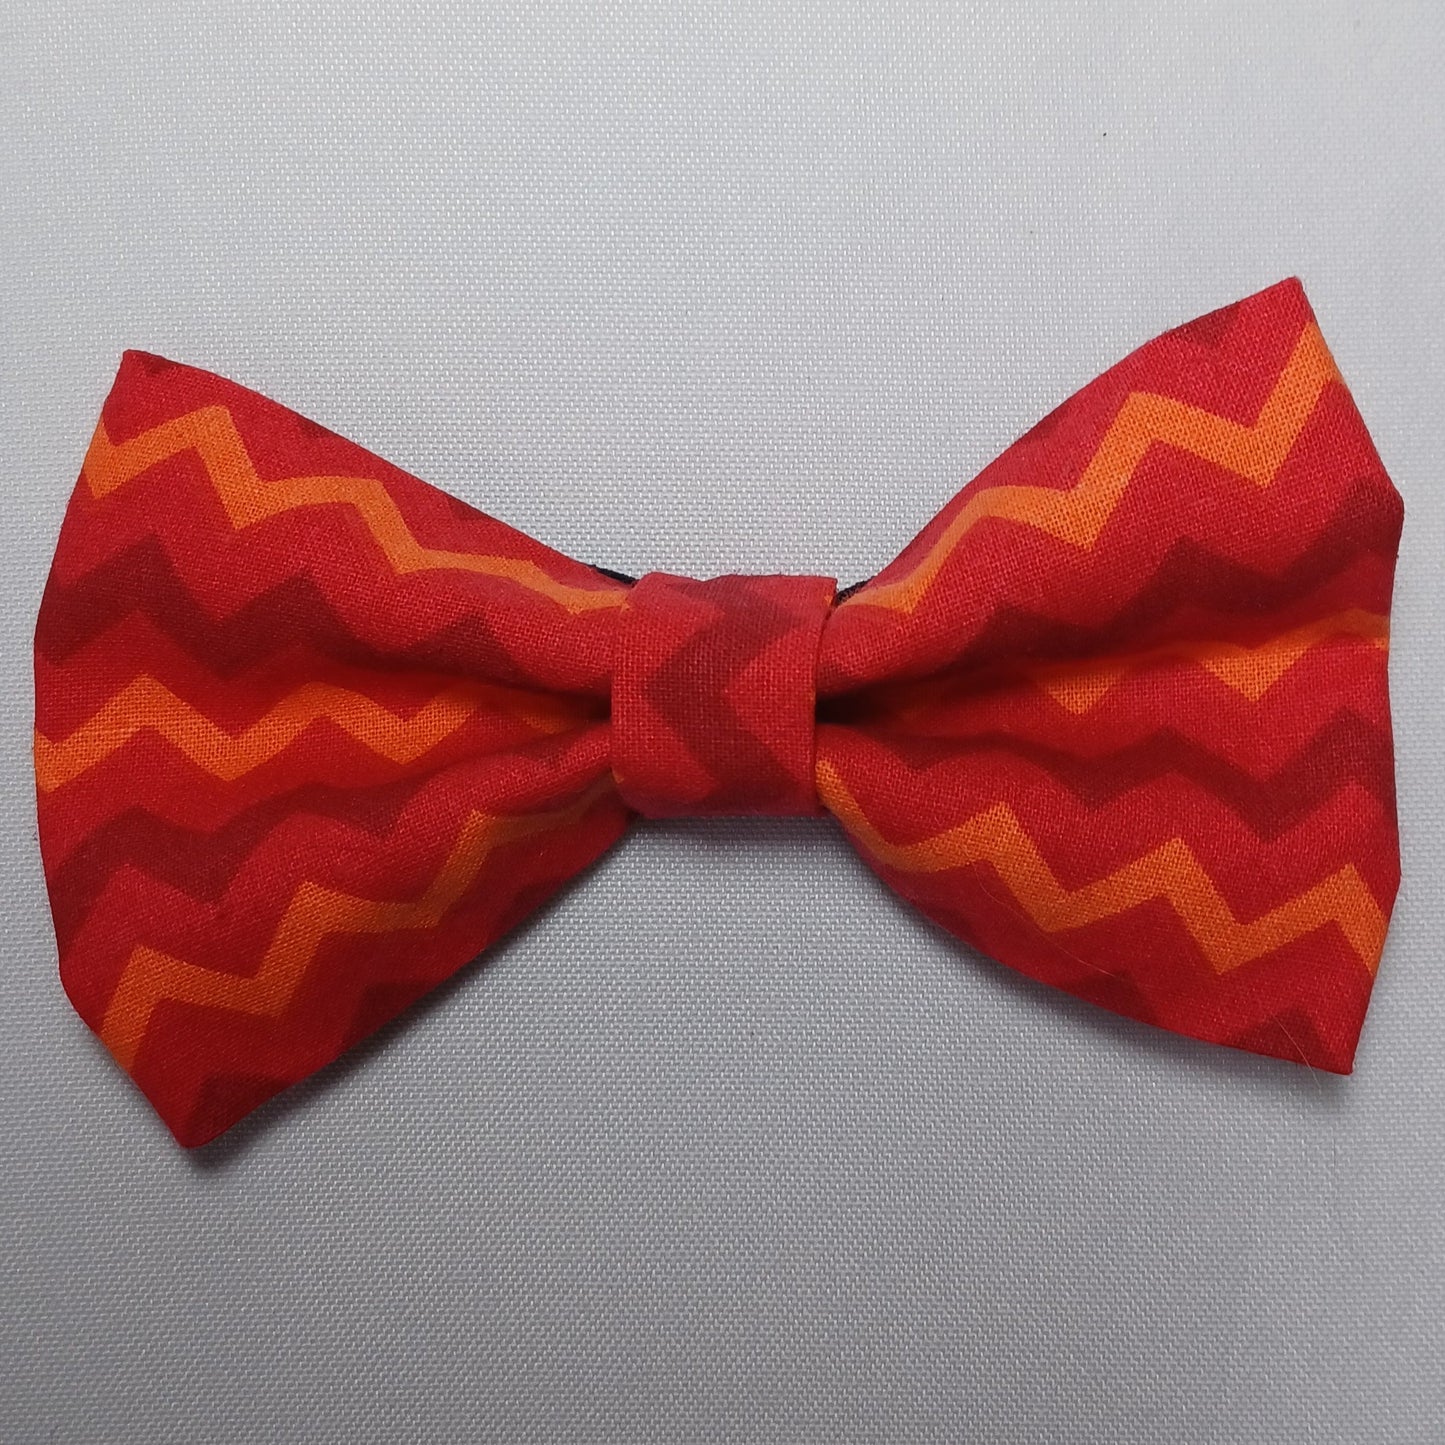 Red Chevron Over-the-Collar Pet Bow / Bowtie